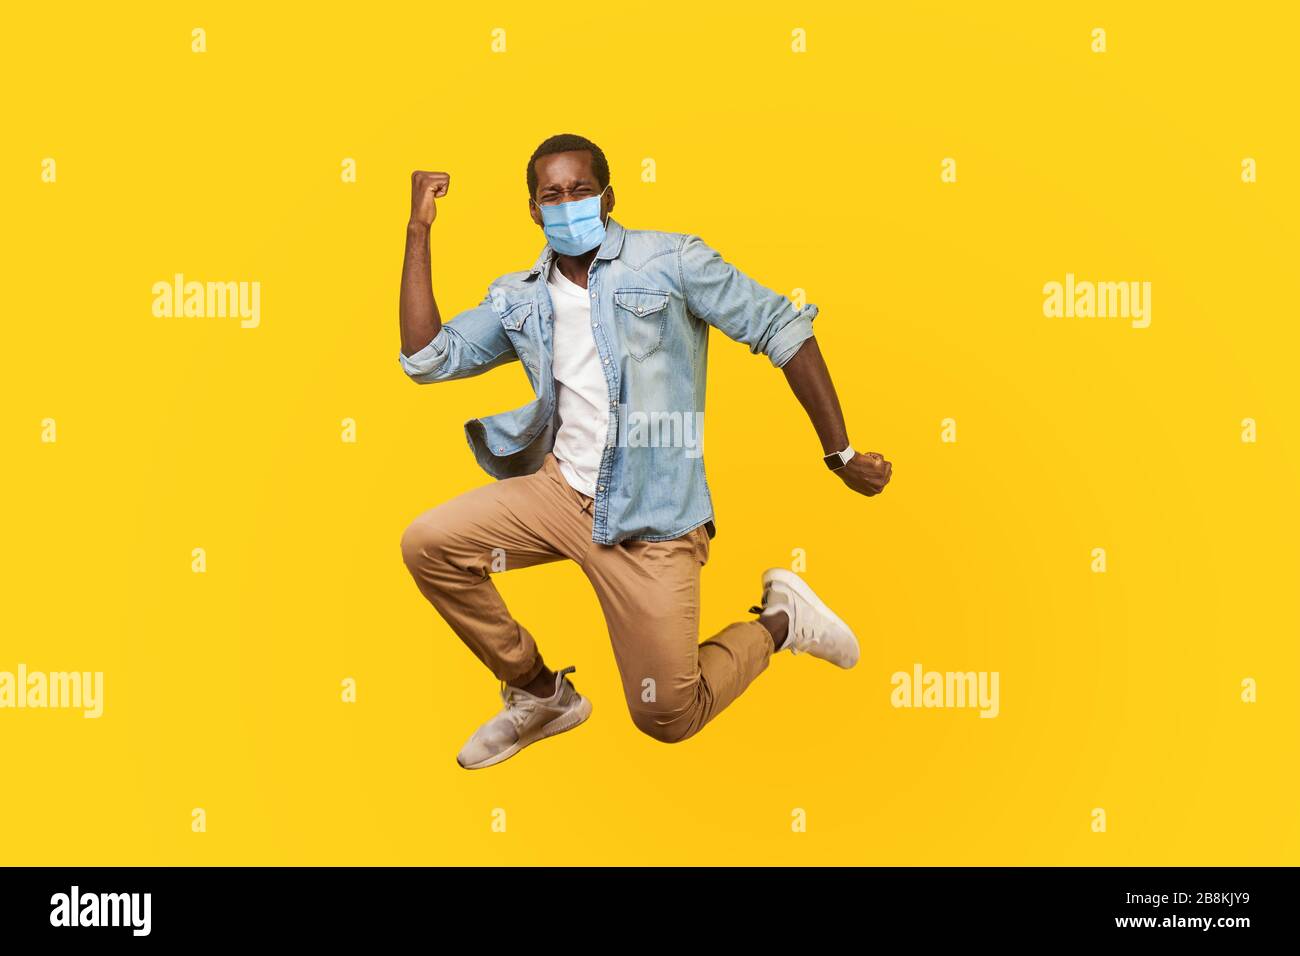 Full length portrait of joyous ecstatic man with medical mask jumping for joy or flying with raised hand, gesturing yes i did it, celebrating success. Stock Photo